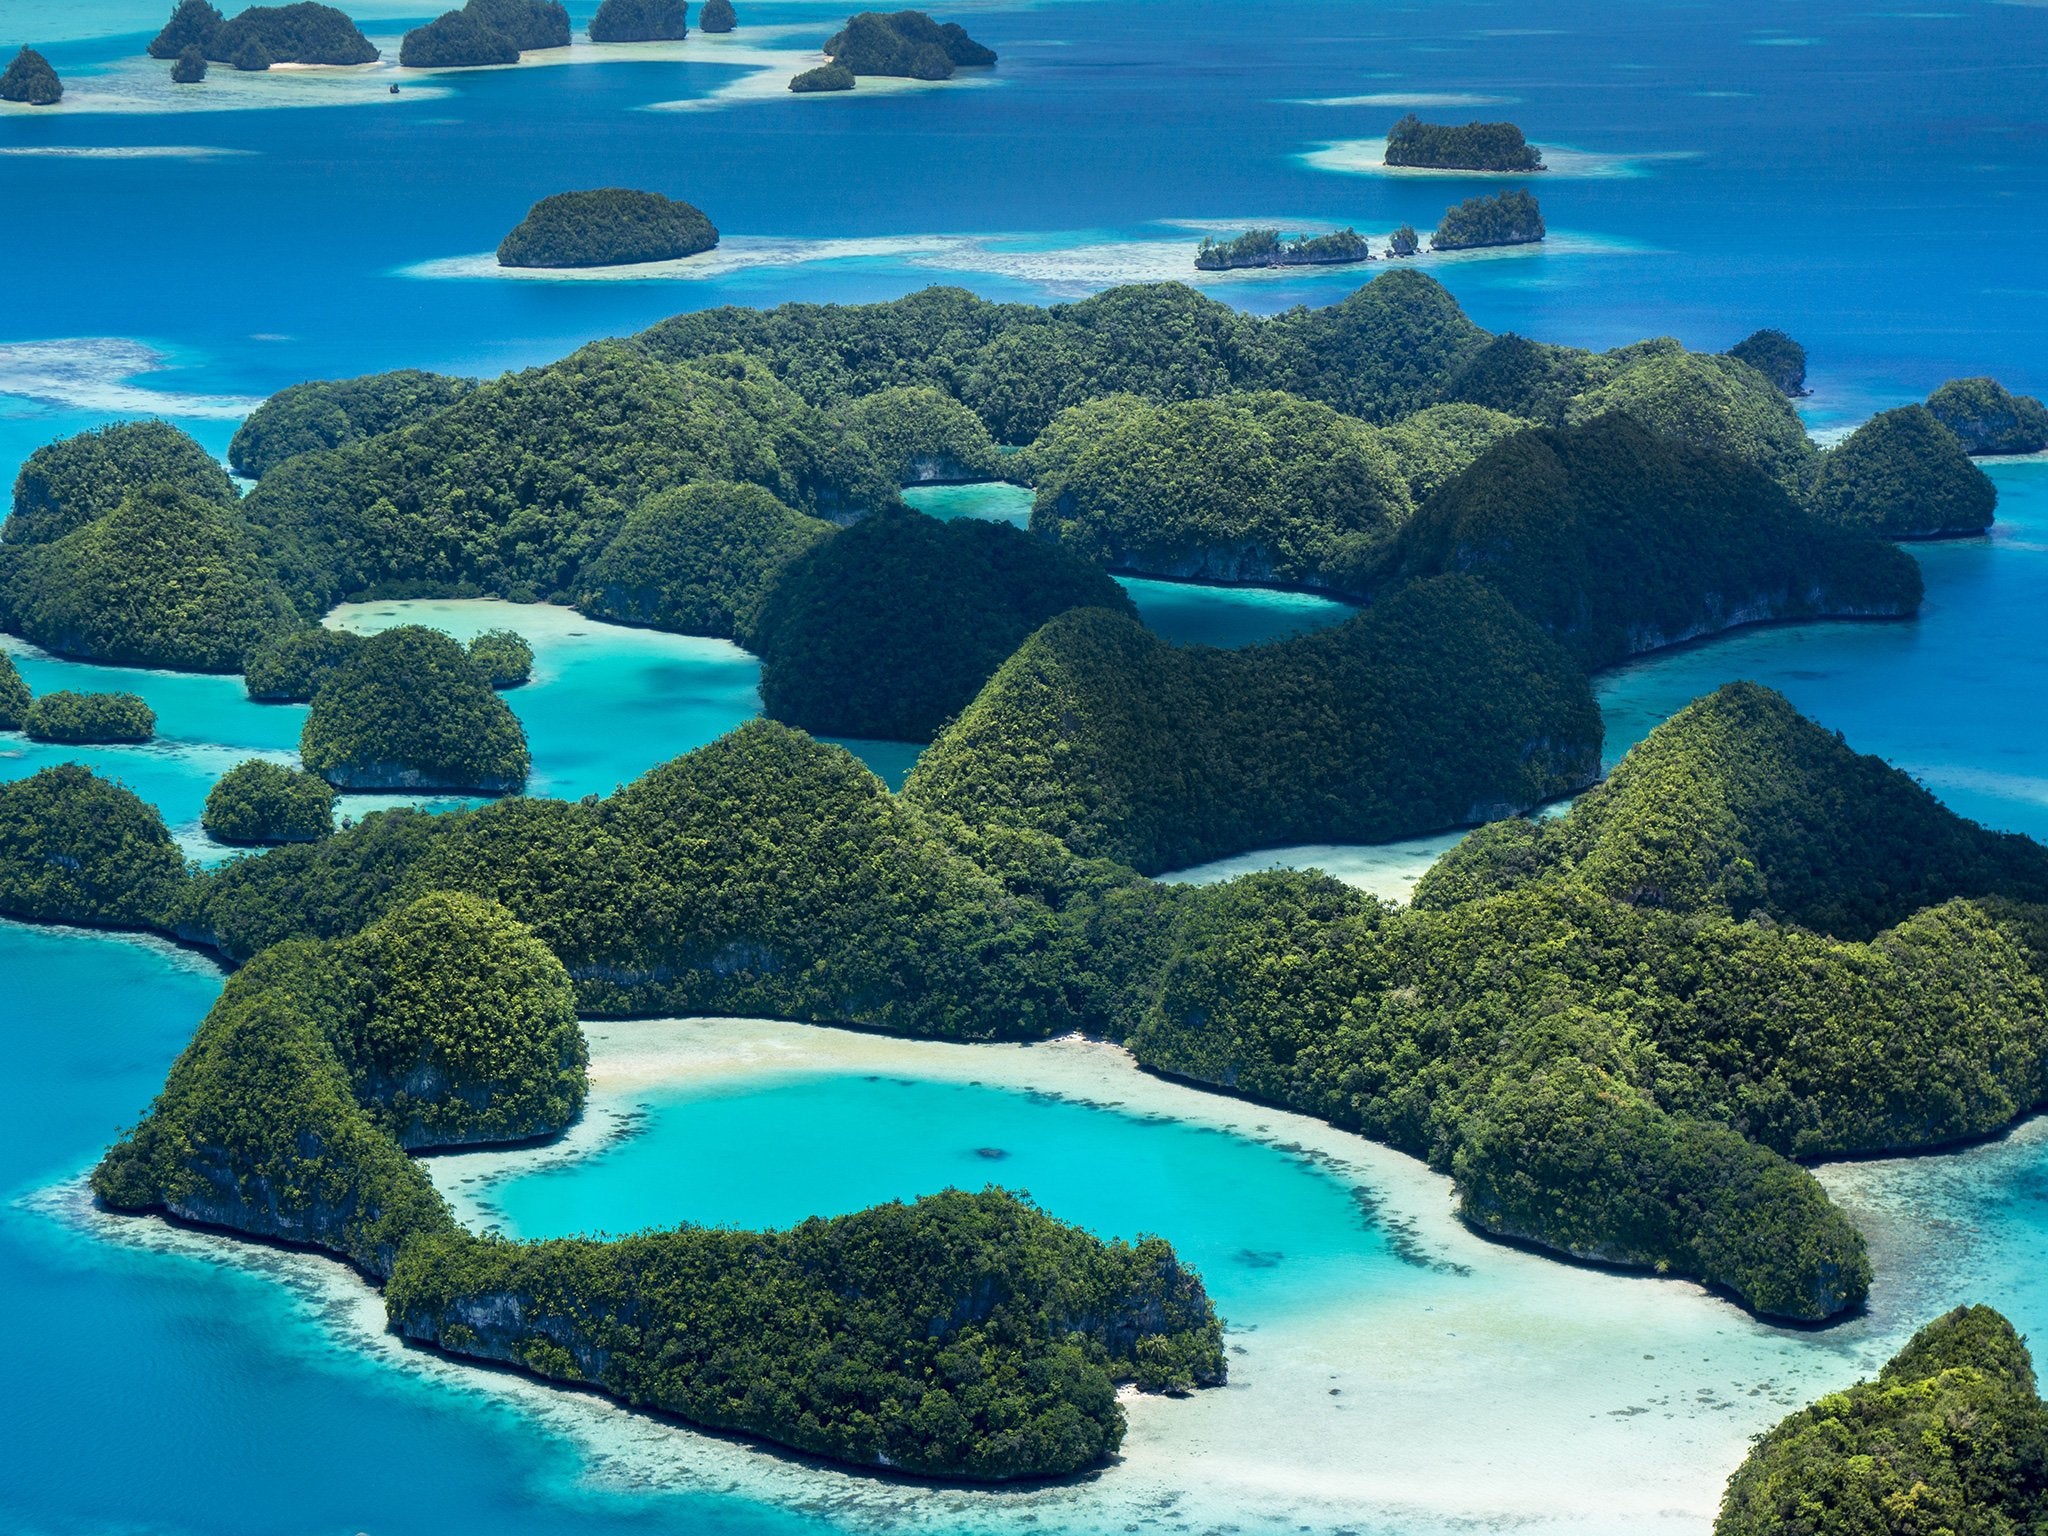 Palau steps up! The first country to ban chemical sunscreens toxic to Coral Reefs